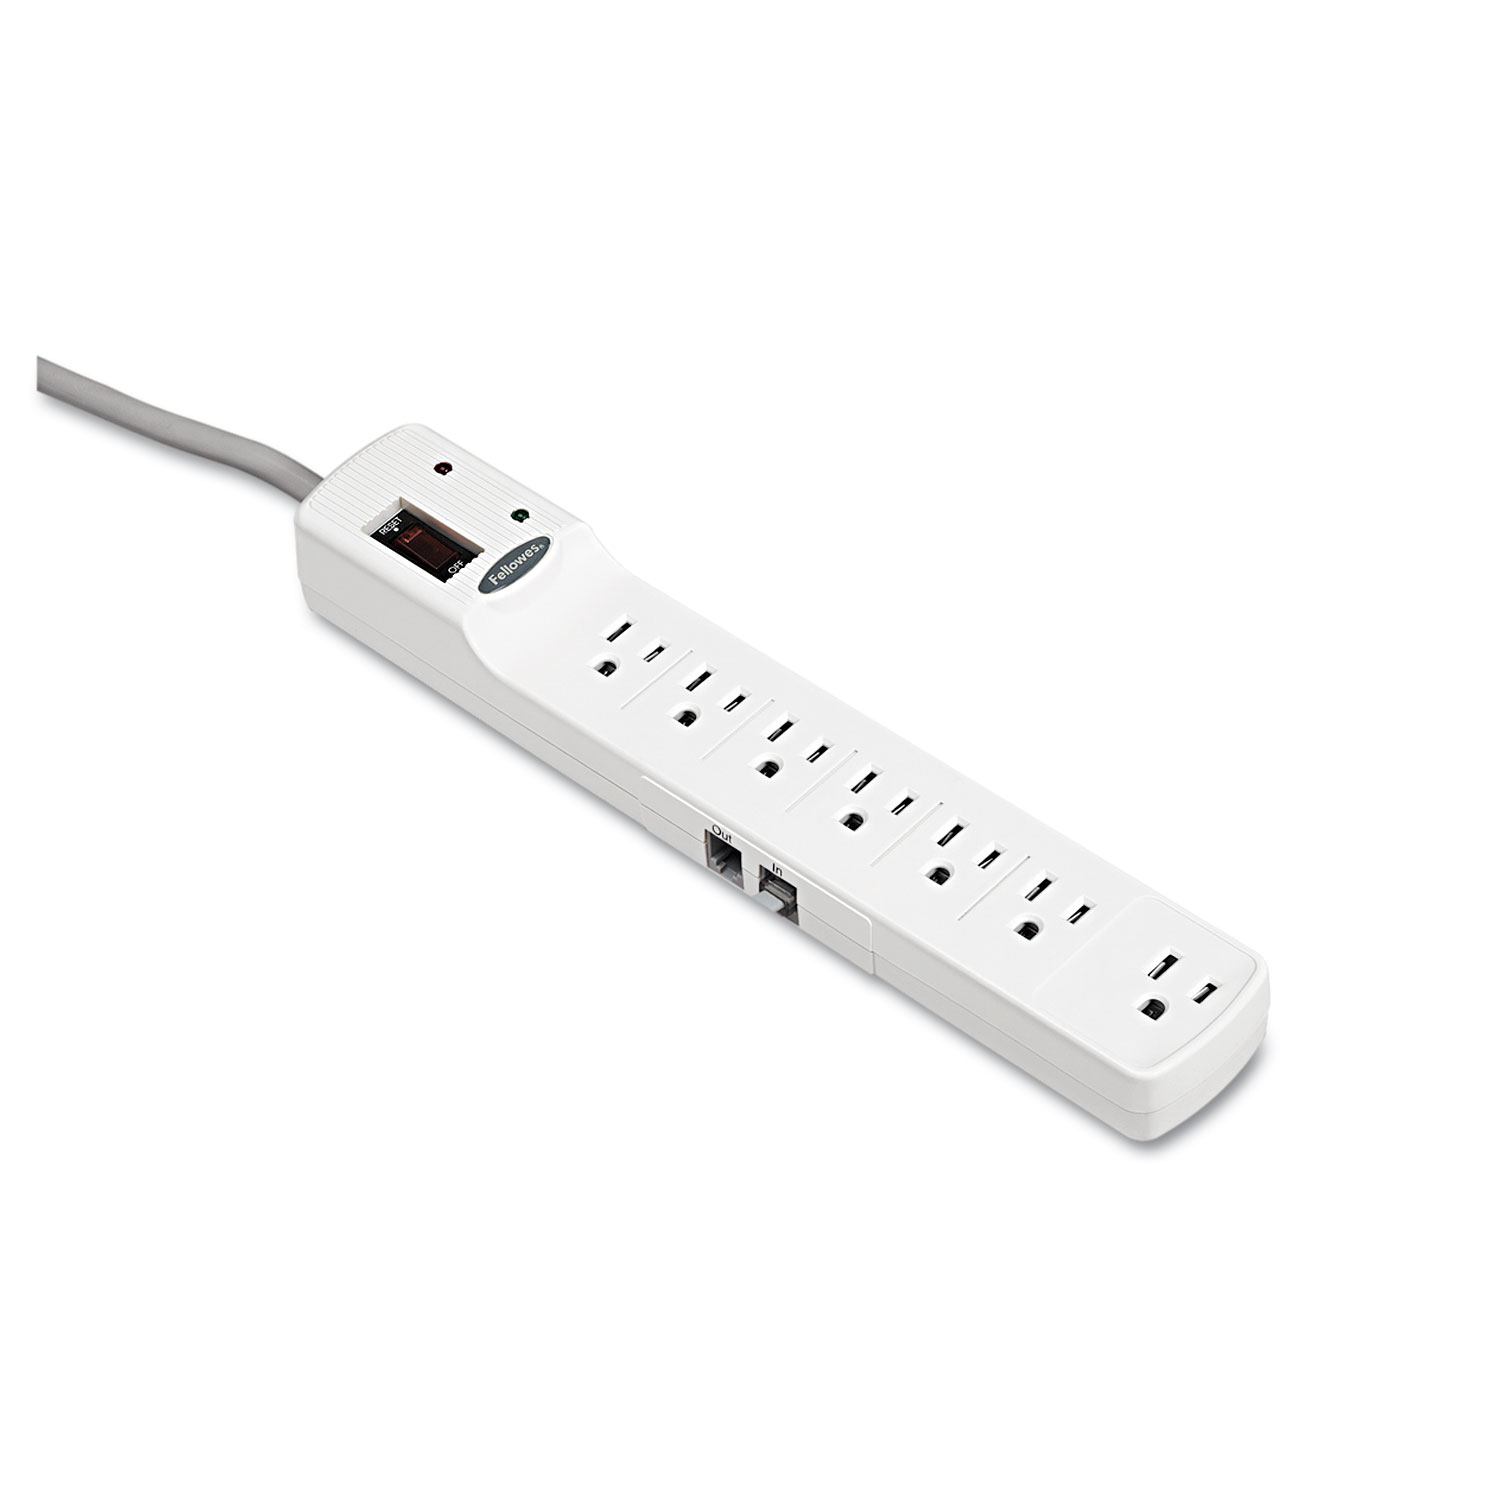  Fellowes 99014 Advanced Computer Series Surge Protector, 7 Outlets, 6 ft Cord, 1000 Joules (FEL99014) 